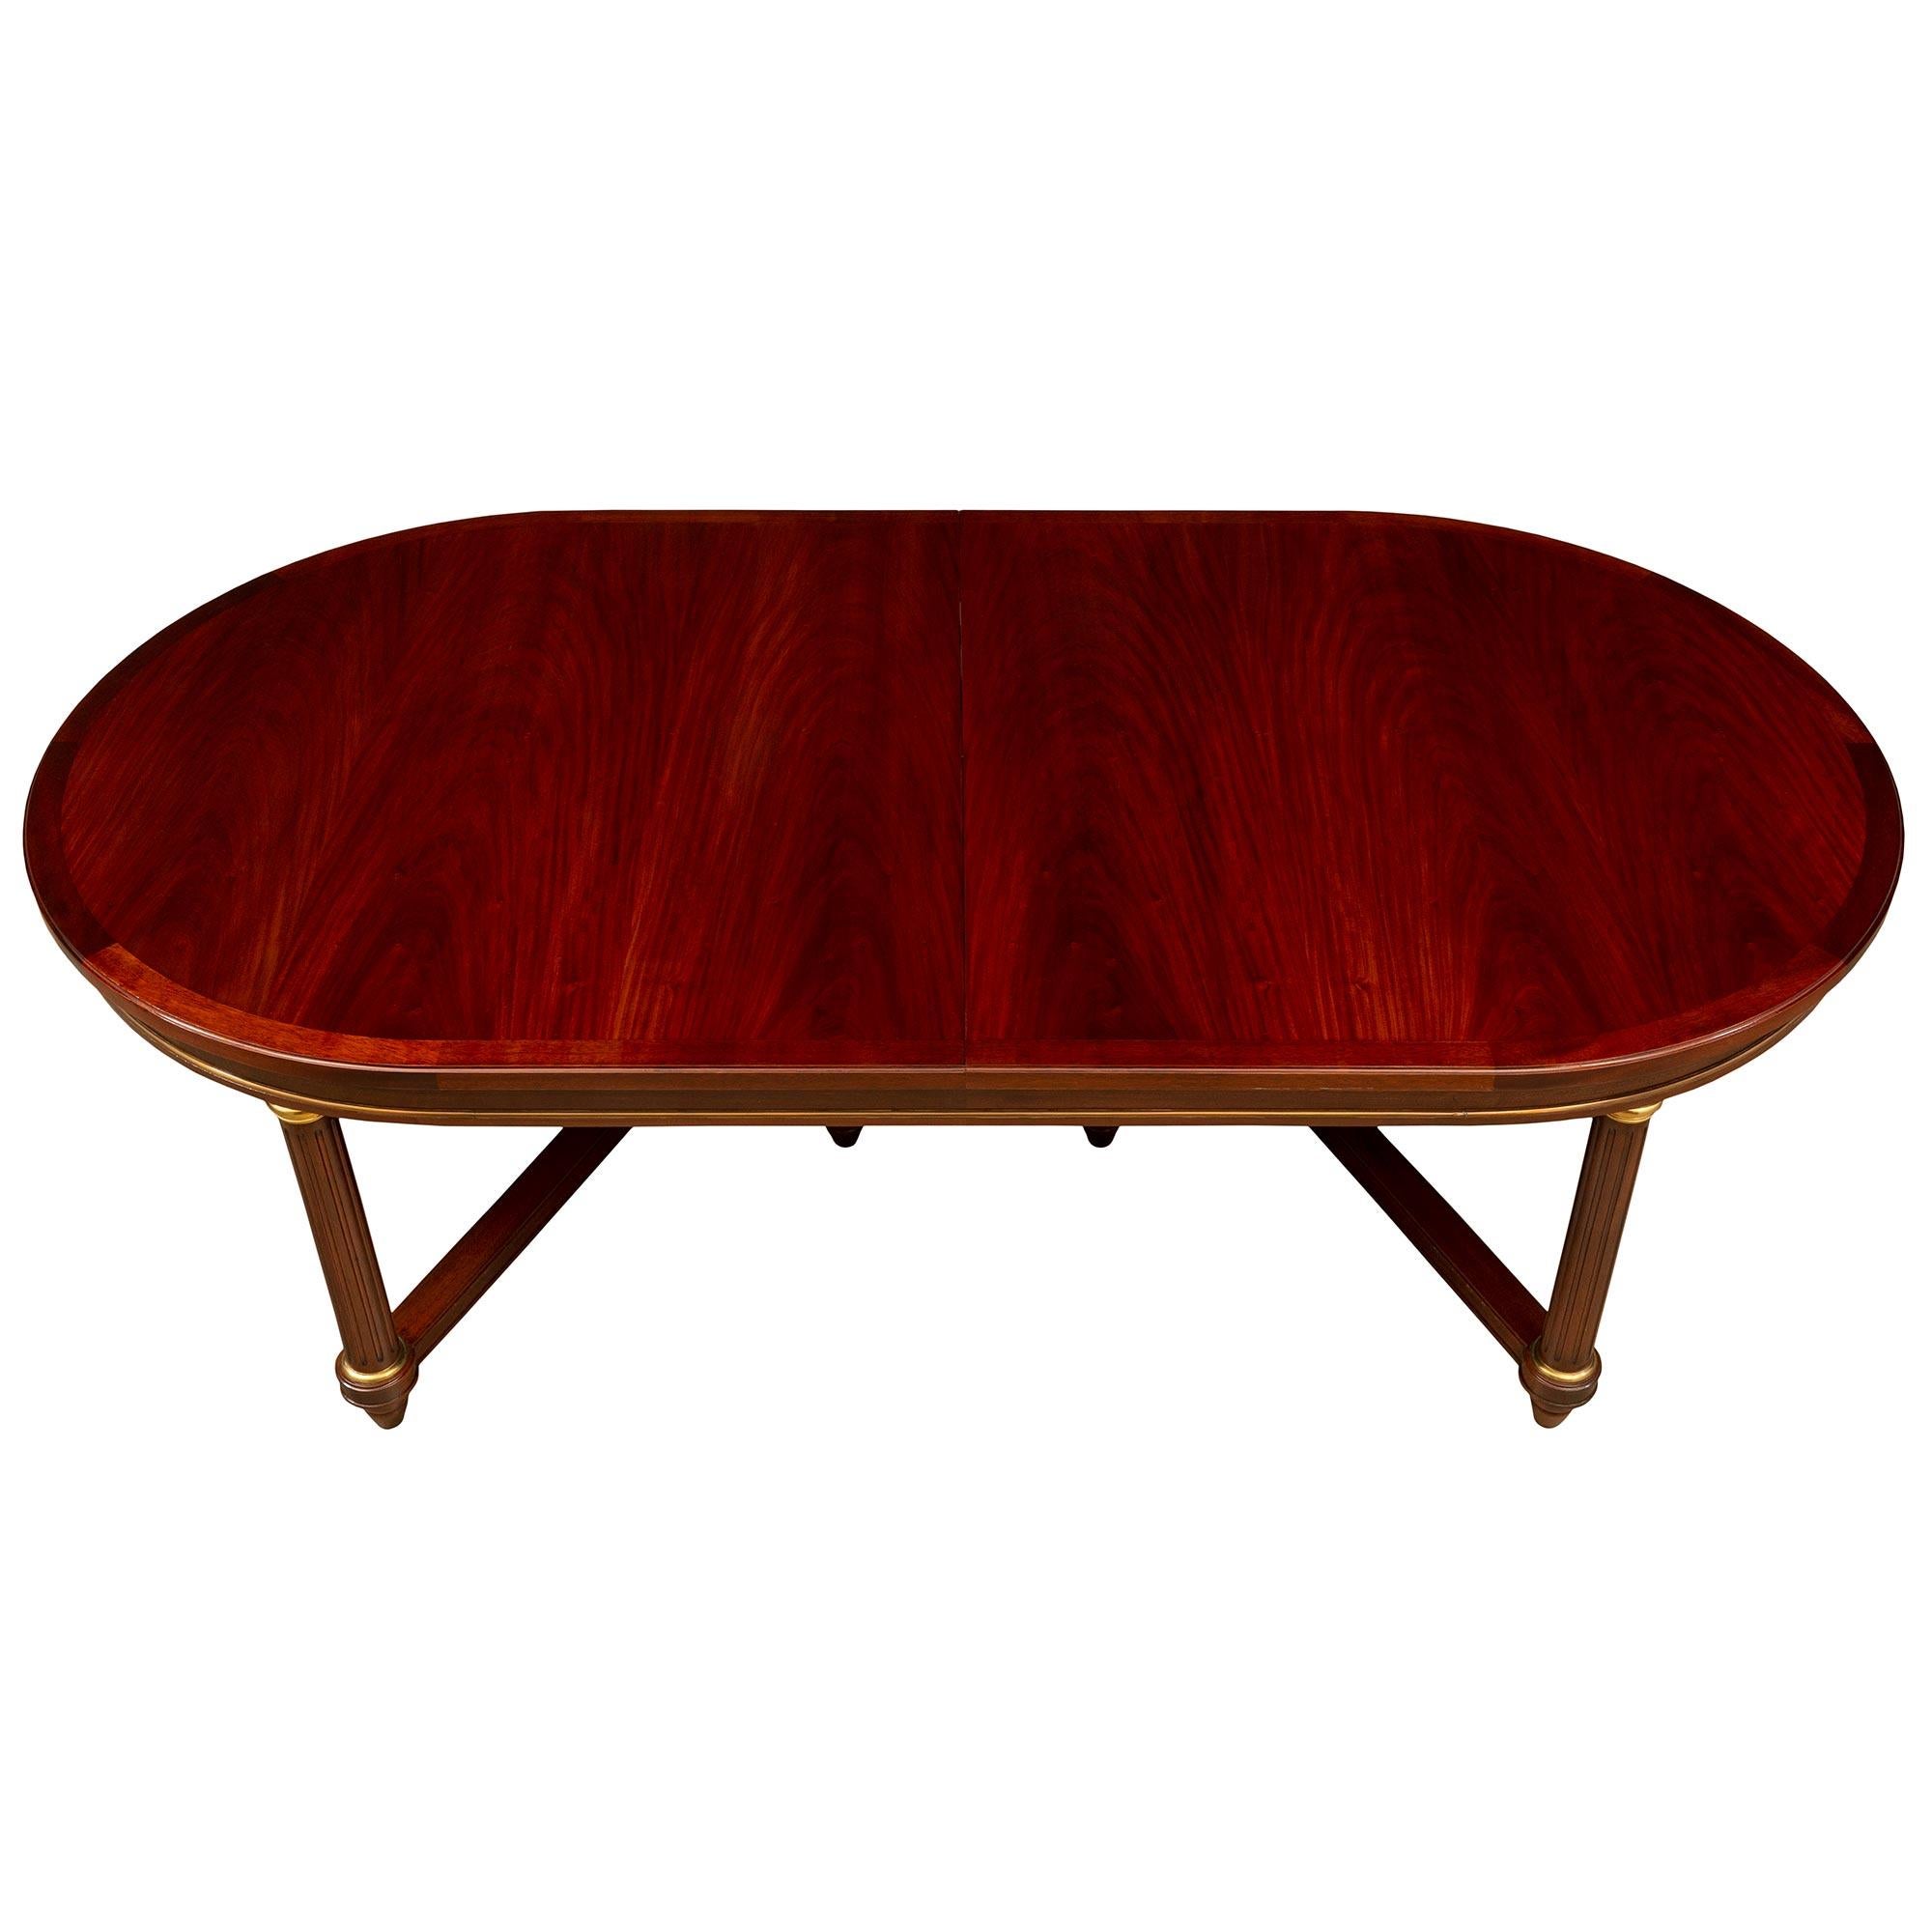 A striking and very elegant French turn of the century Empire st. flamed Mahogany and ormolu dining table. The table is raised by six elegant and impressive lightly tapered circular fluted columns with fine topie shaped feet each connected by a most